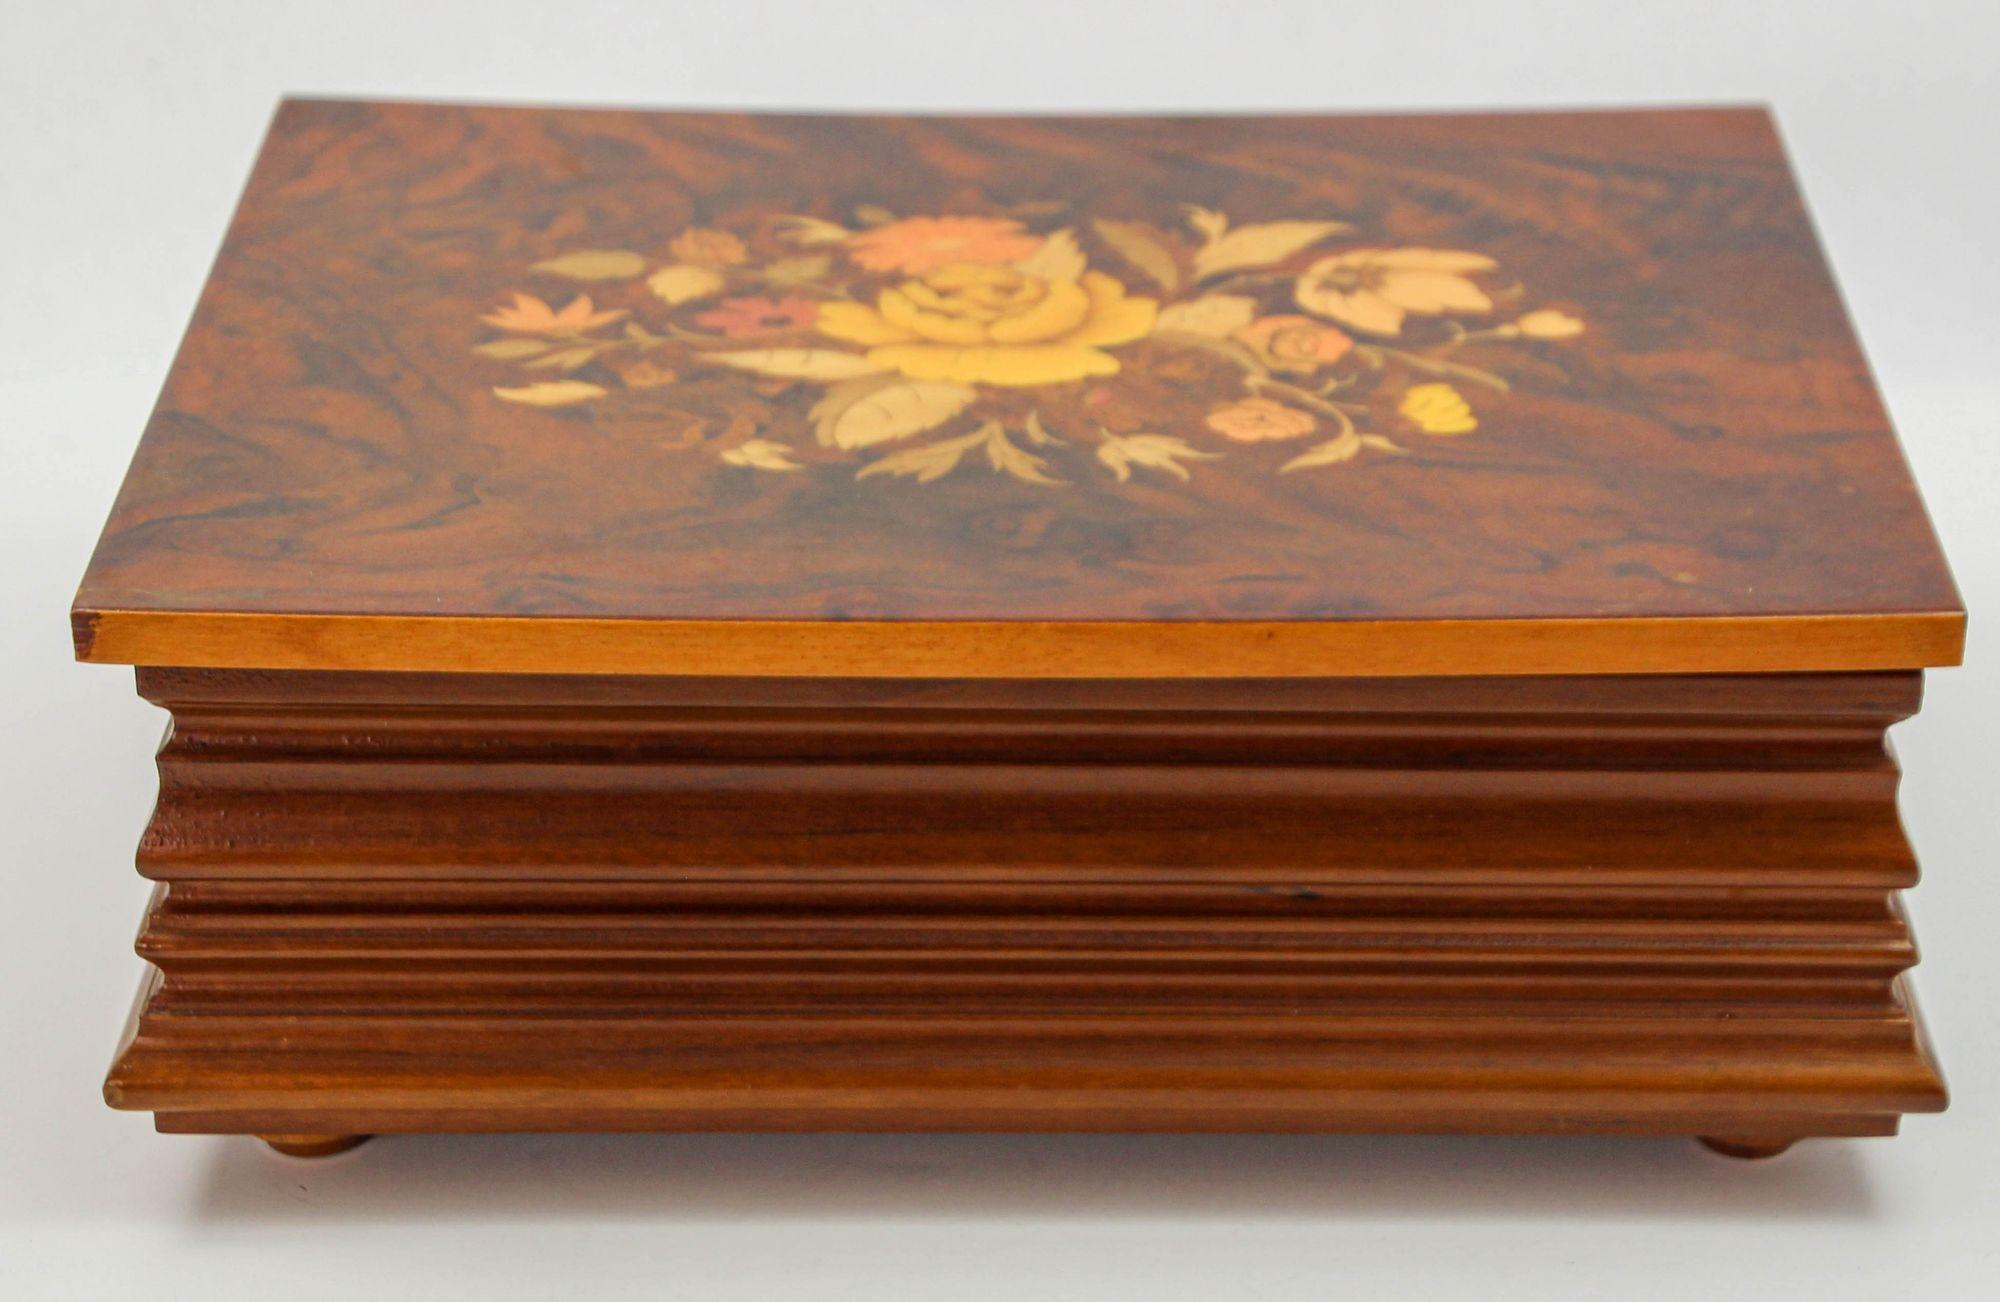 Art Deco Jewelry Wooden Music Box Made in Italy with Flowers Inlaid Burl Wood Top For Sale